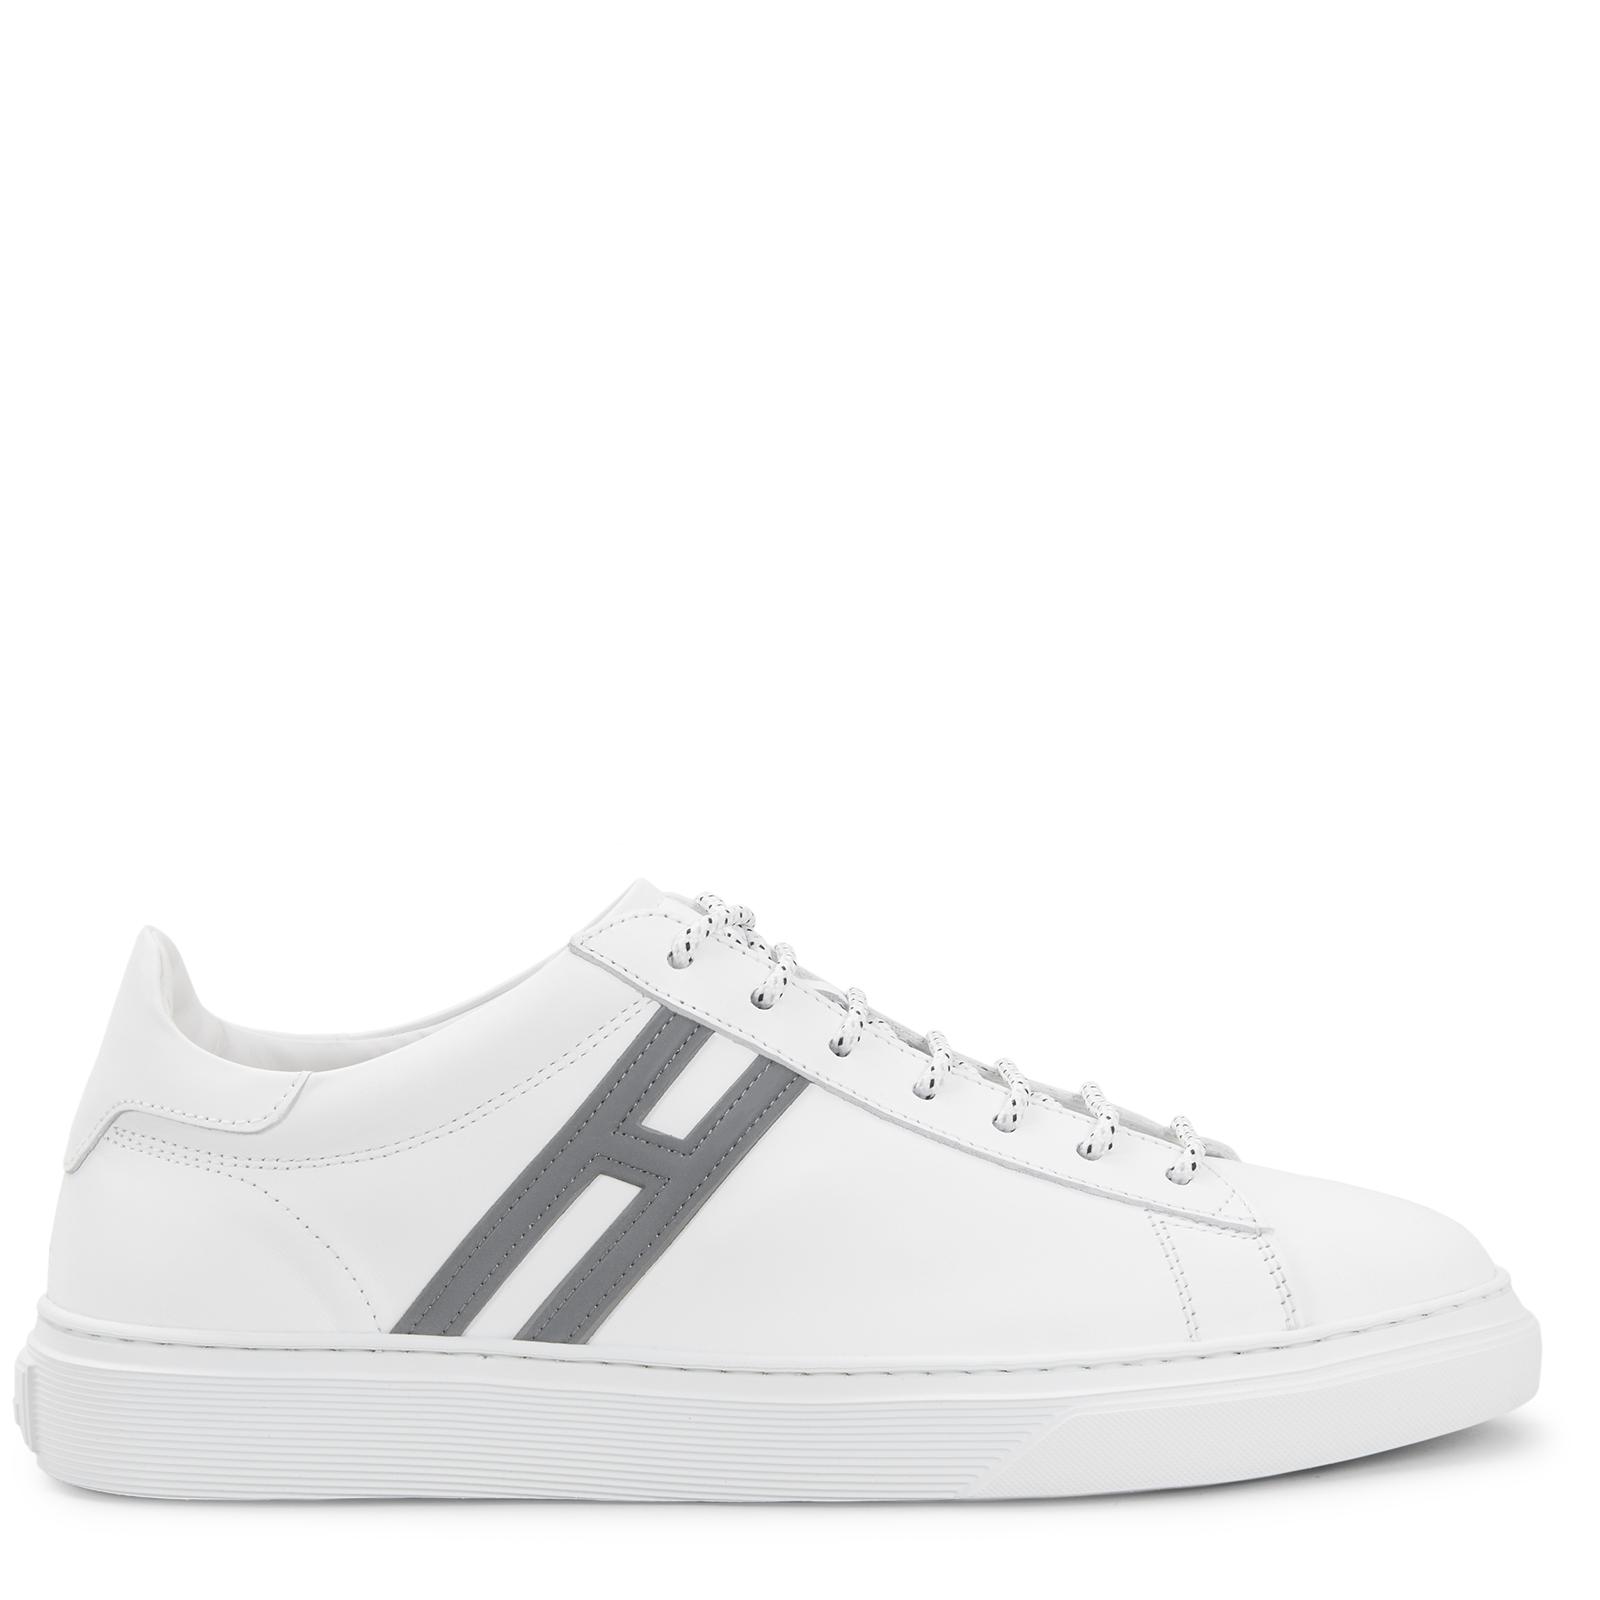 Hogan Leather H365 Contrast-panel Sneakers in White - Save 64% - Lyst